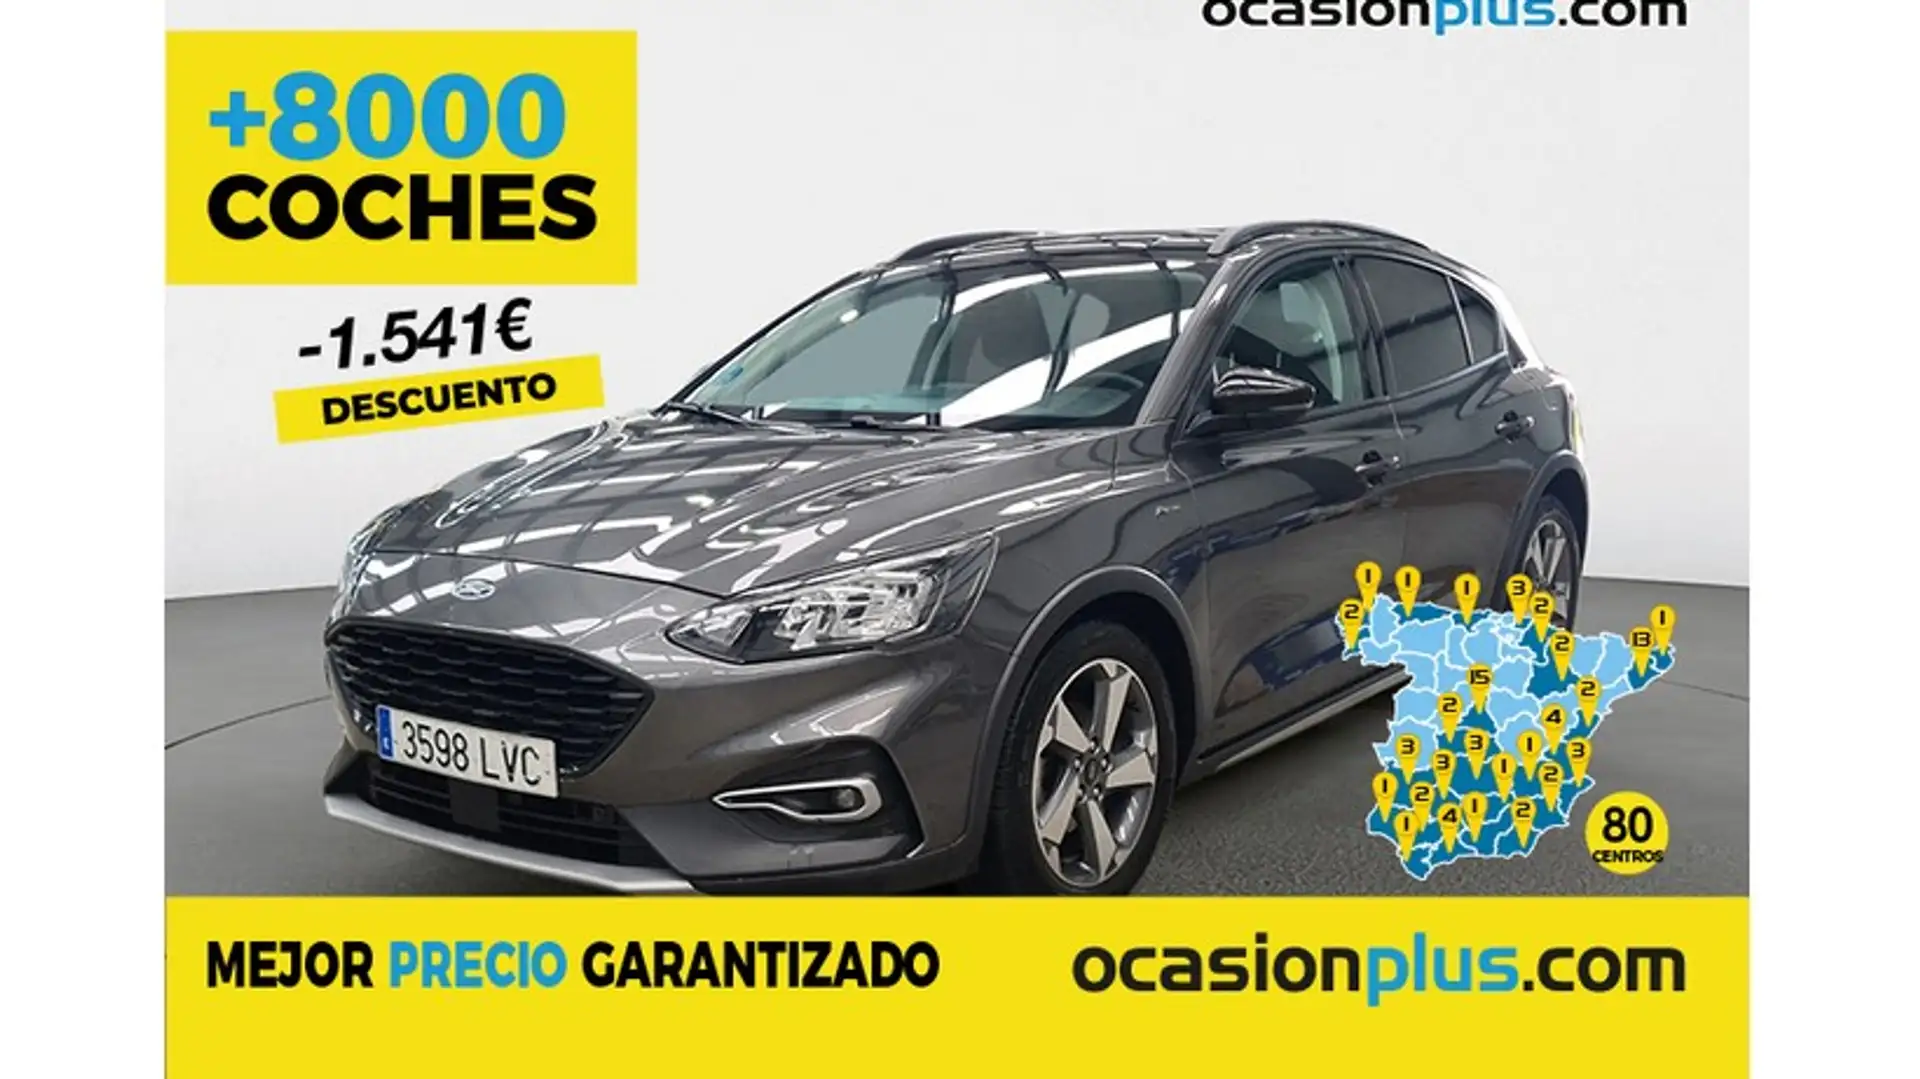 Ford Focus 1.0 Ecoboost MHEV Active 125 Gris - 1